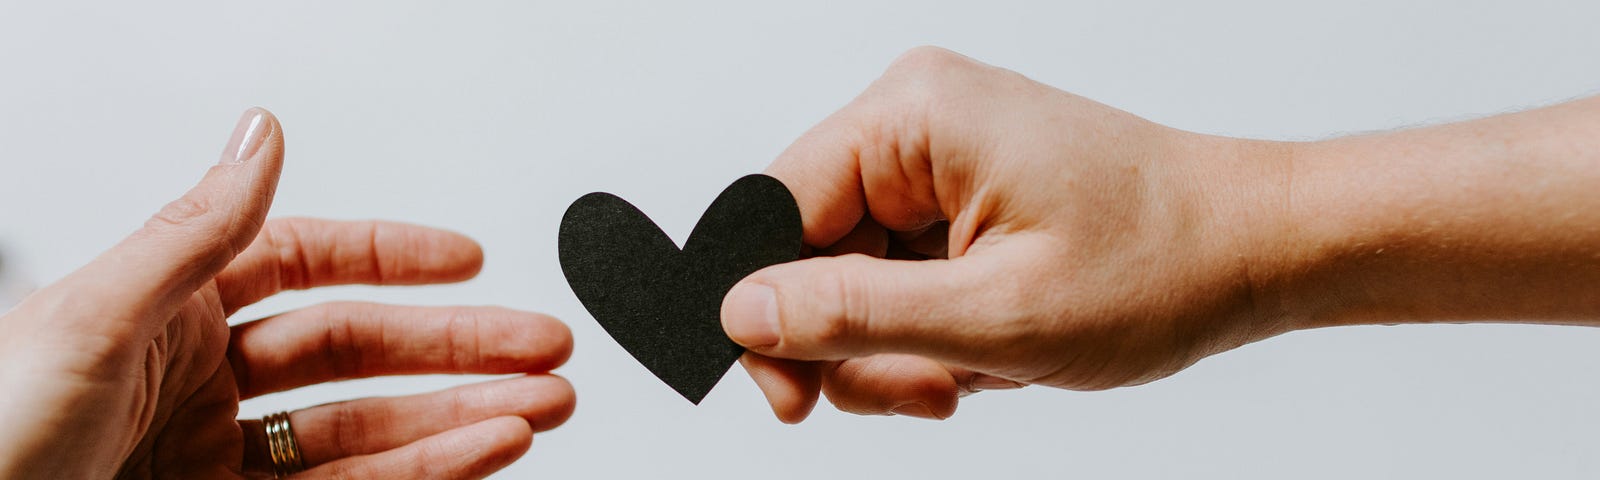 Showing only their hands, one person offers a paper cut-out of a heart to another person, who reaches to receive it.